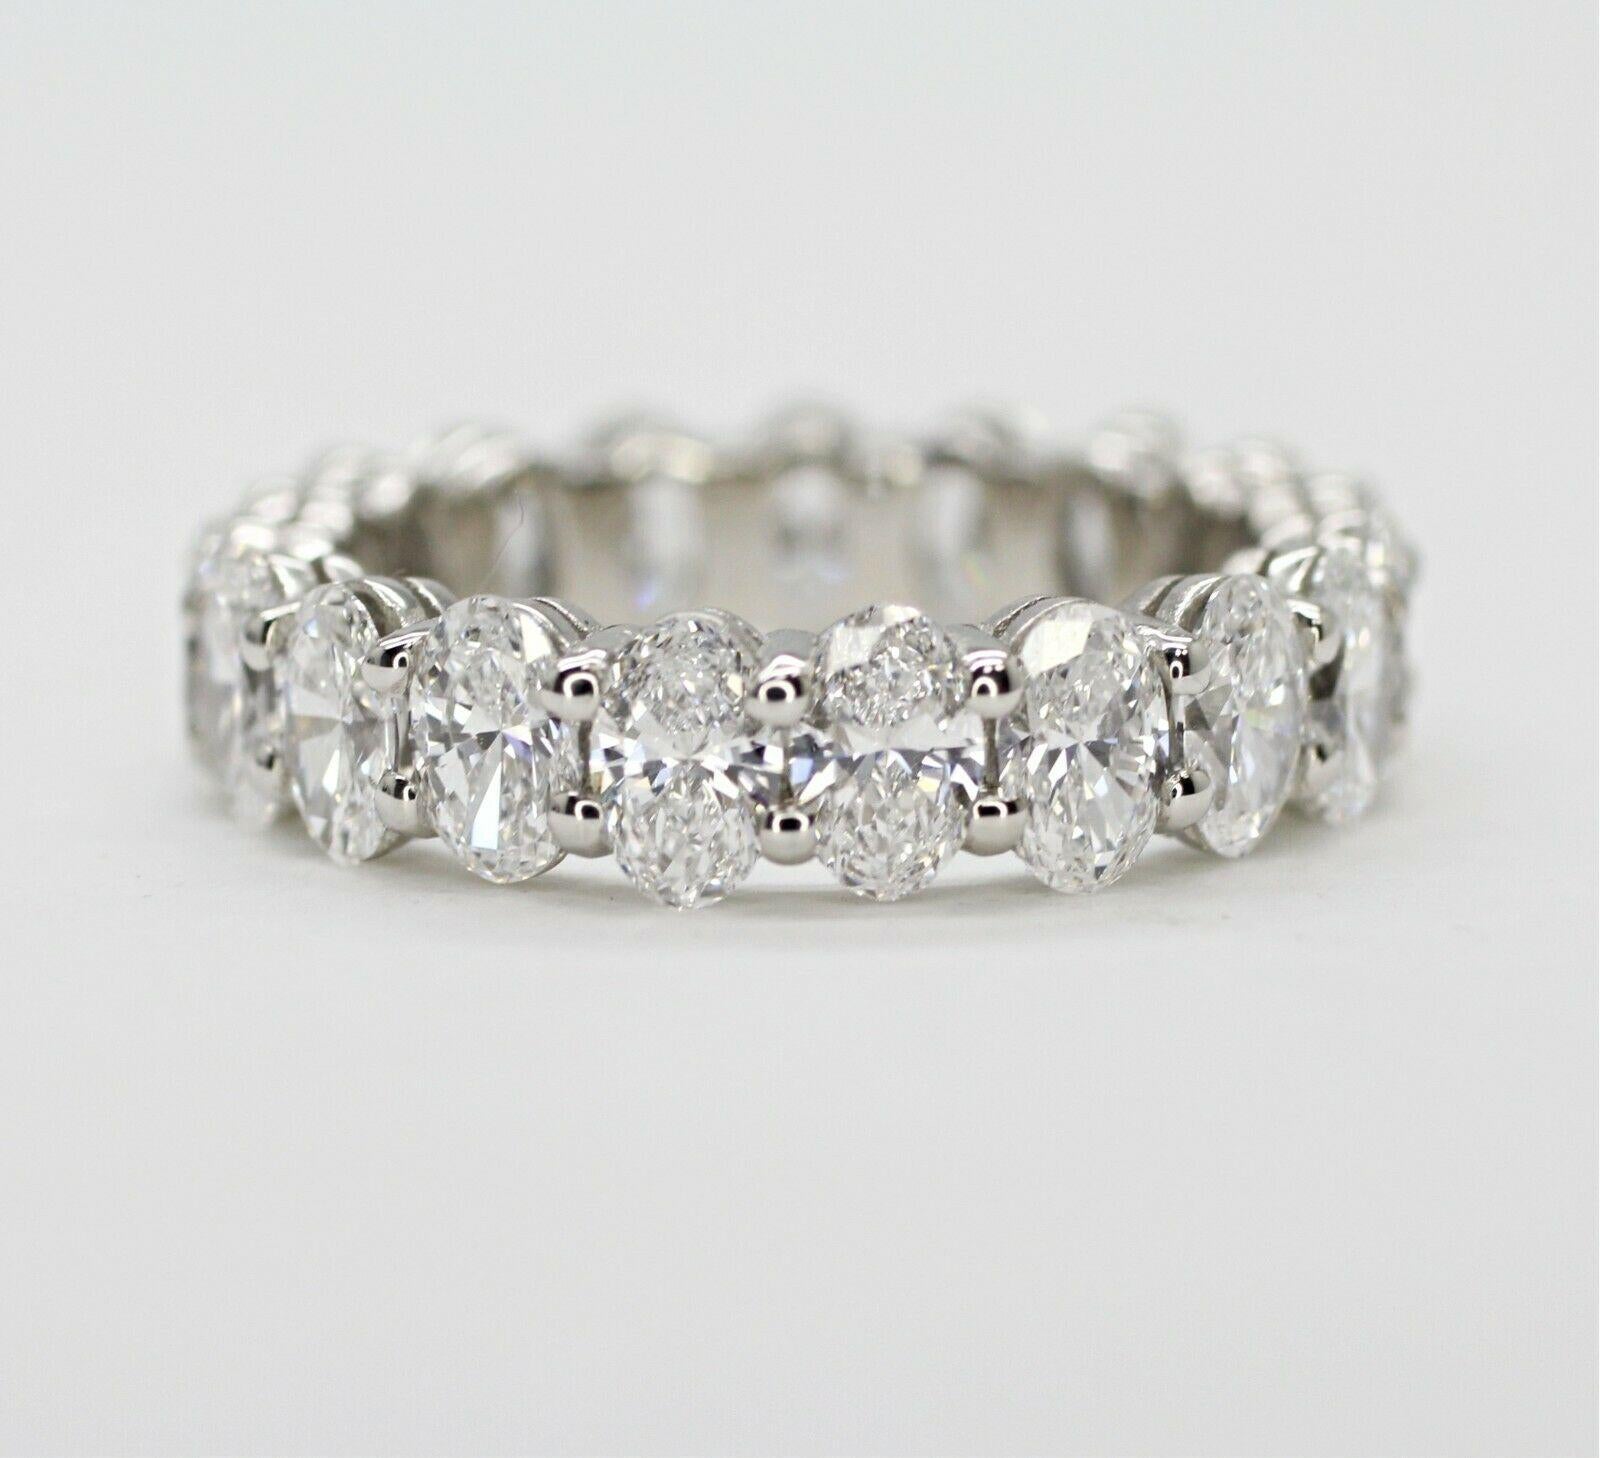 Contemporary Oval Cut Diamond Eternity Ring with 3.70 Carat Total Weight in Platinum